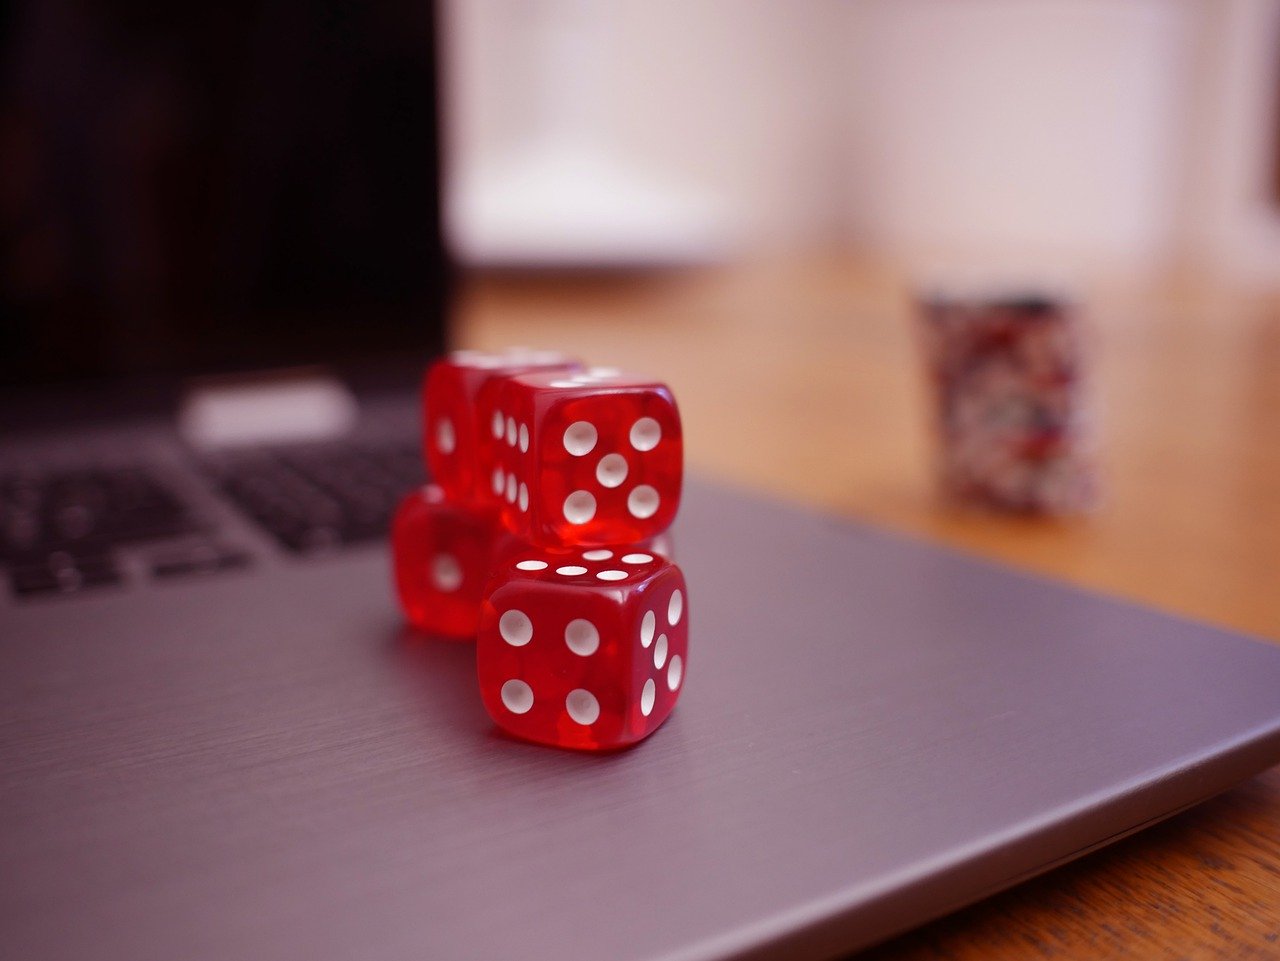 Online Casino Games Give Those in the UK an At-Home Entertainment Option -  About Manchester